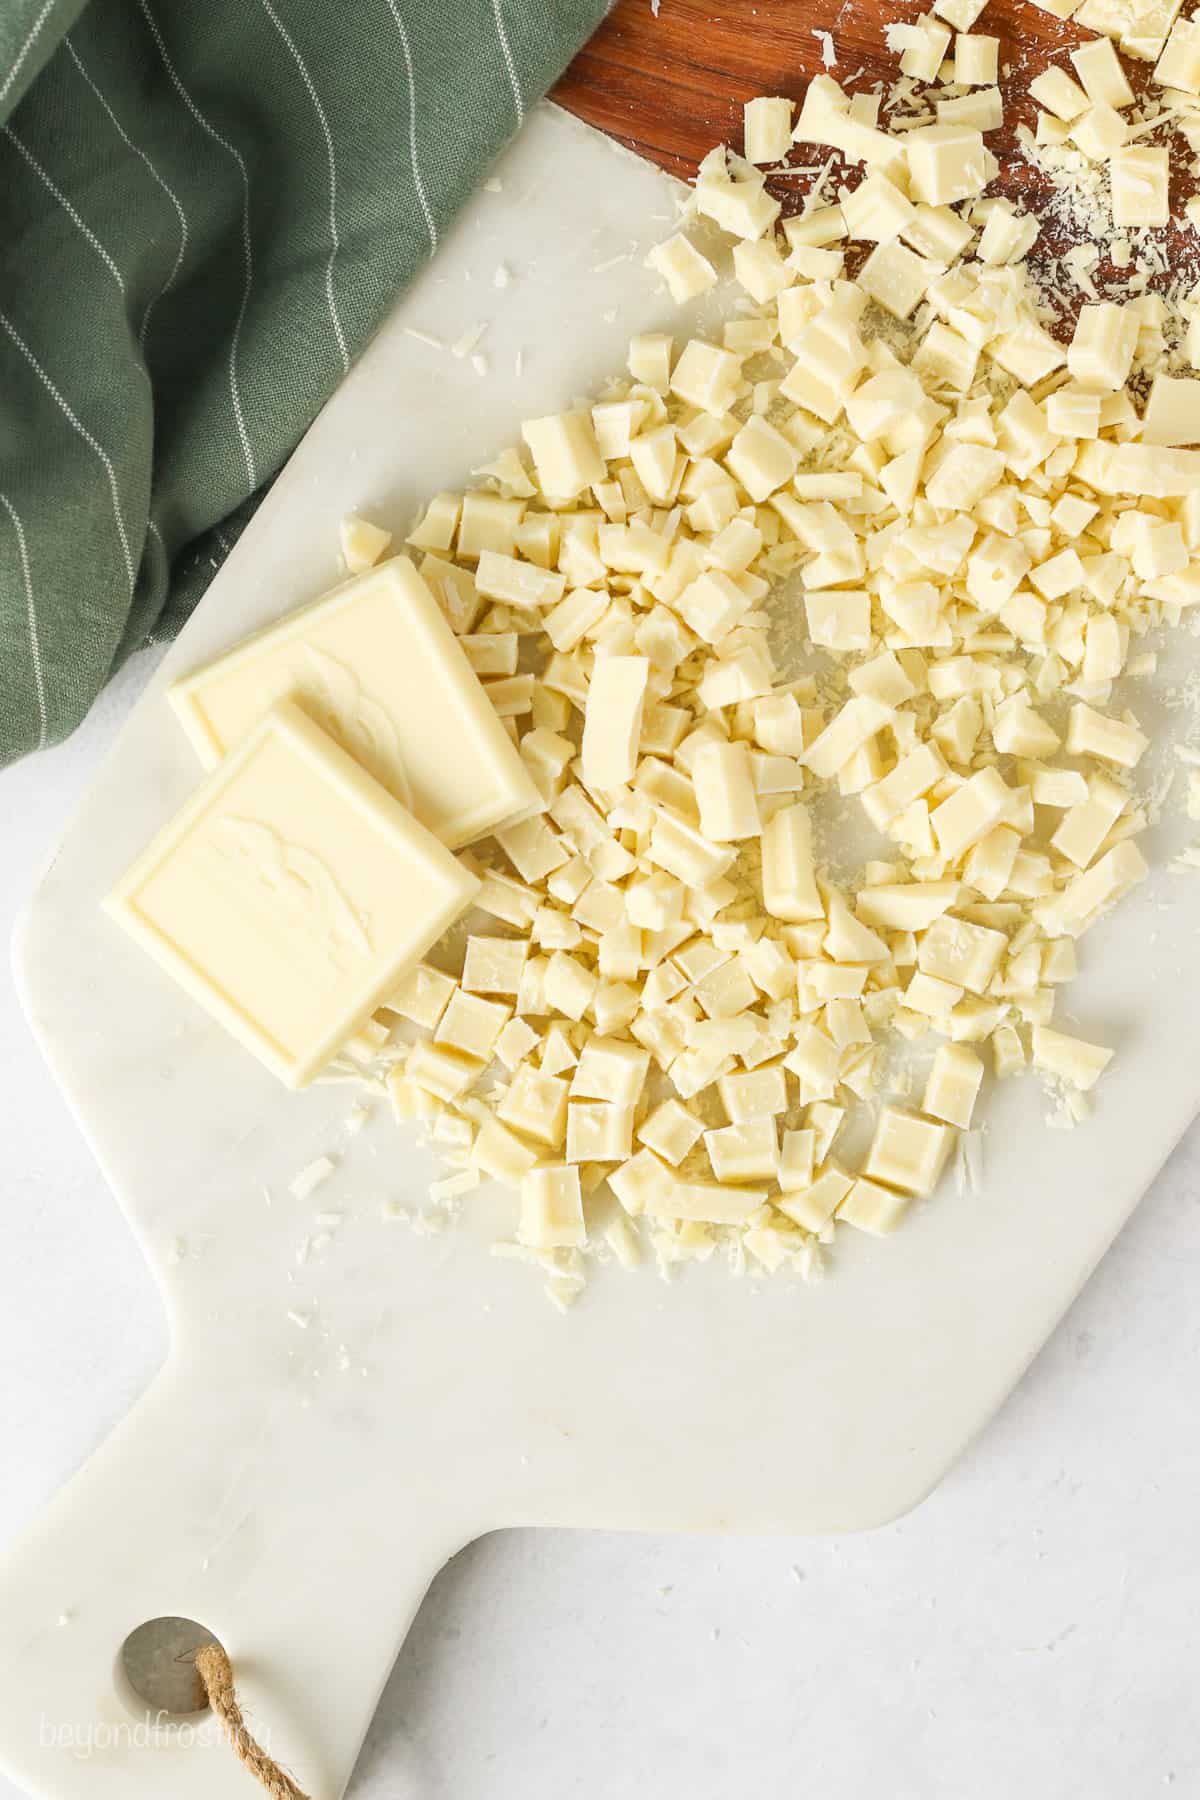 Overhead view of two white chocolate squares next to chopped white chocolate pieces on a cutting board.